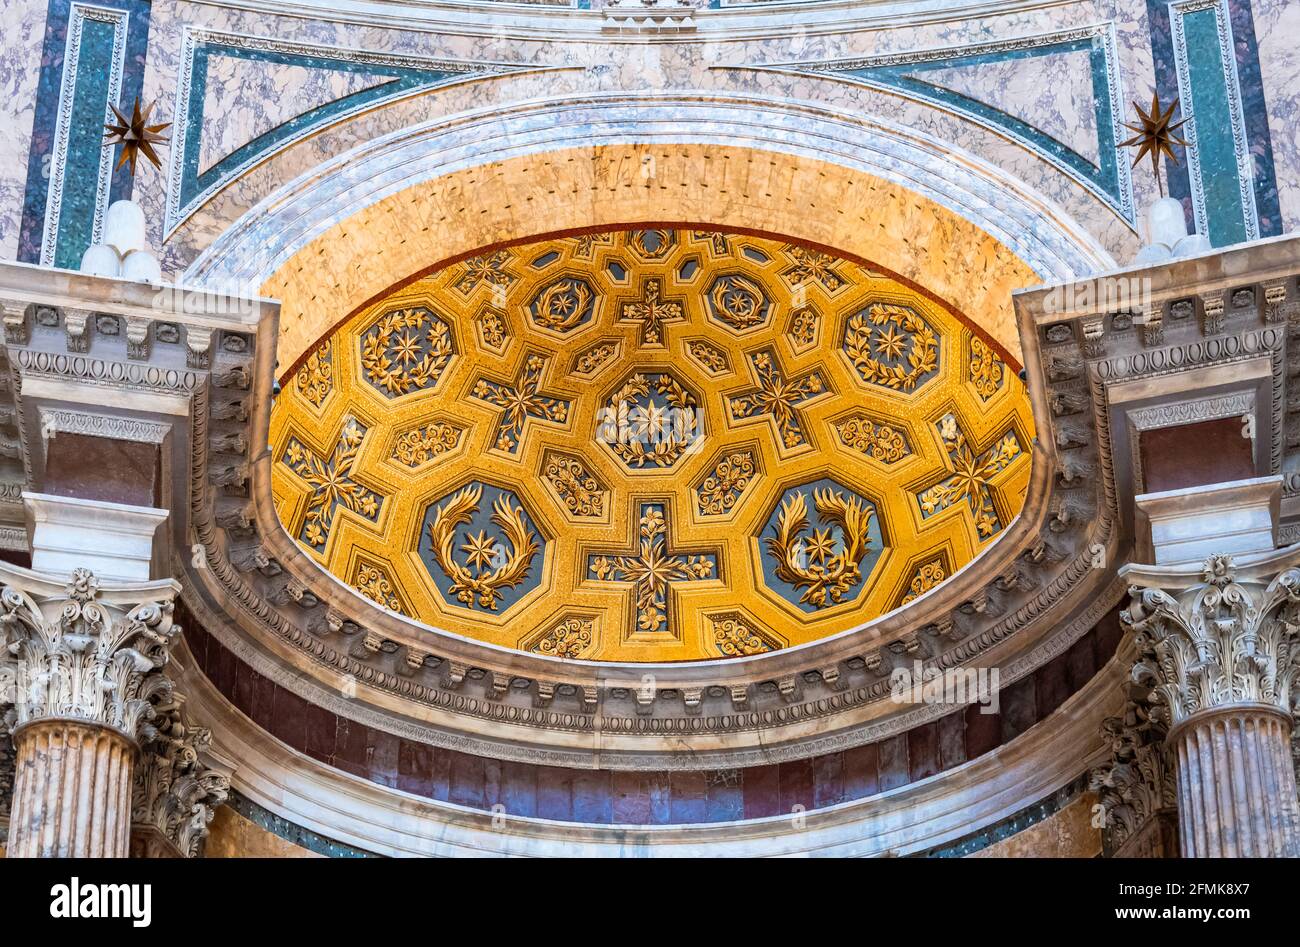 Close-up on interior decoration of dome ceiling of catholic cathedral in Rome Stock Photo